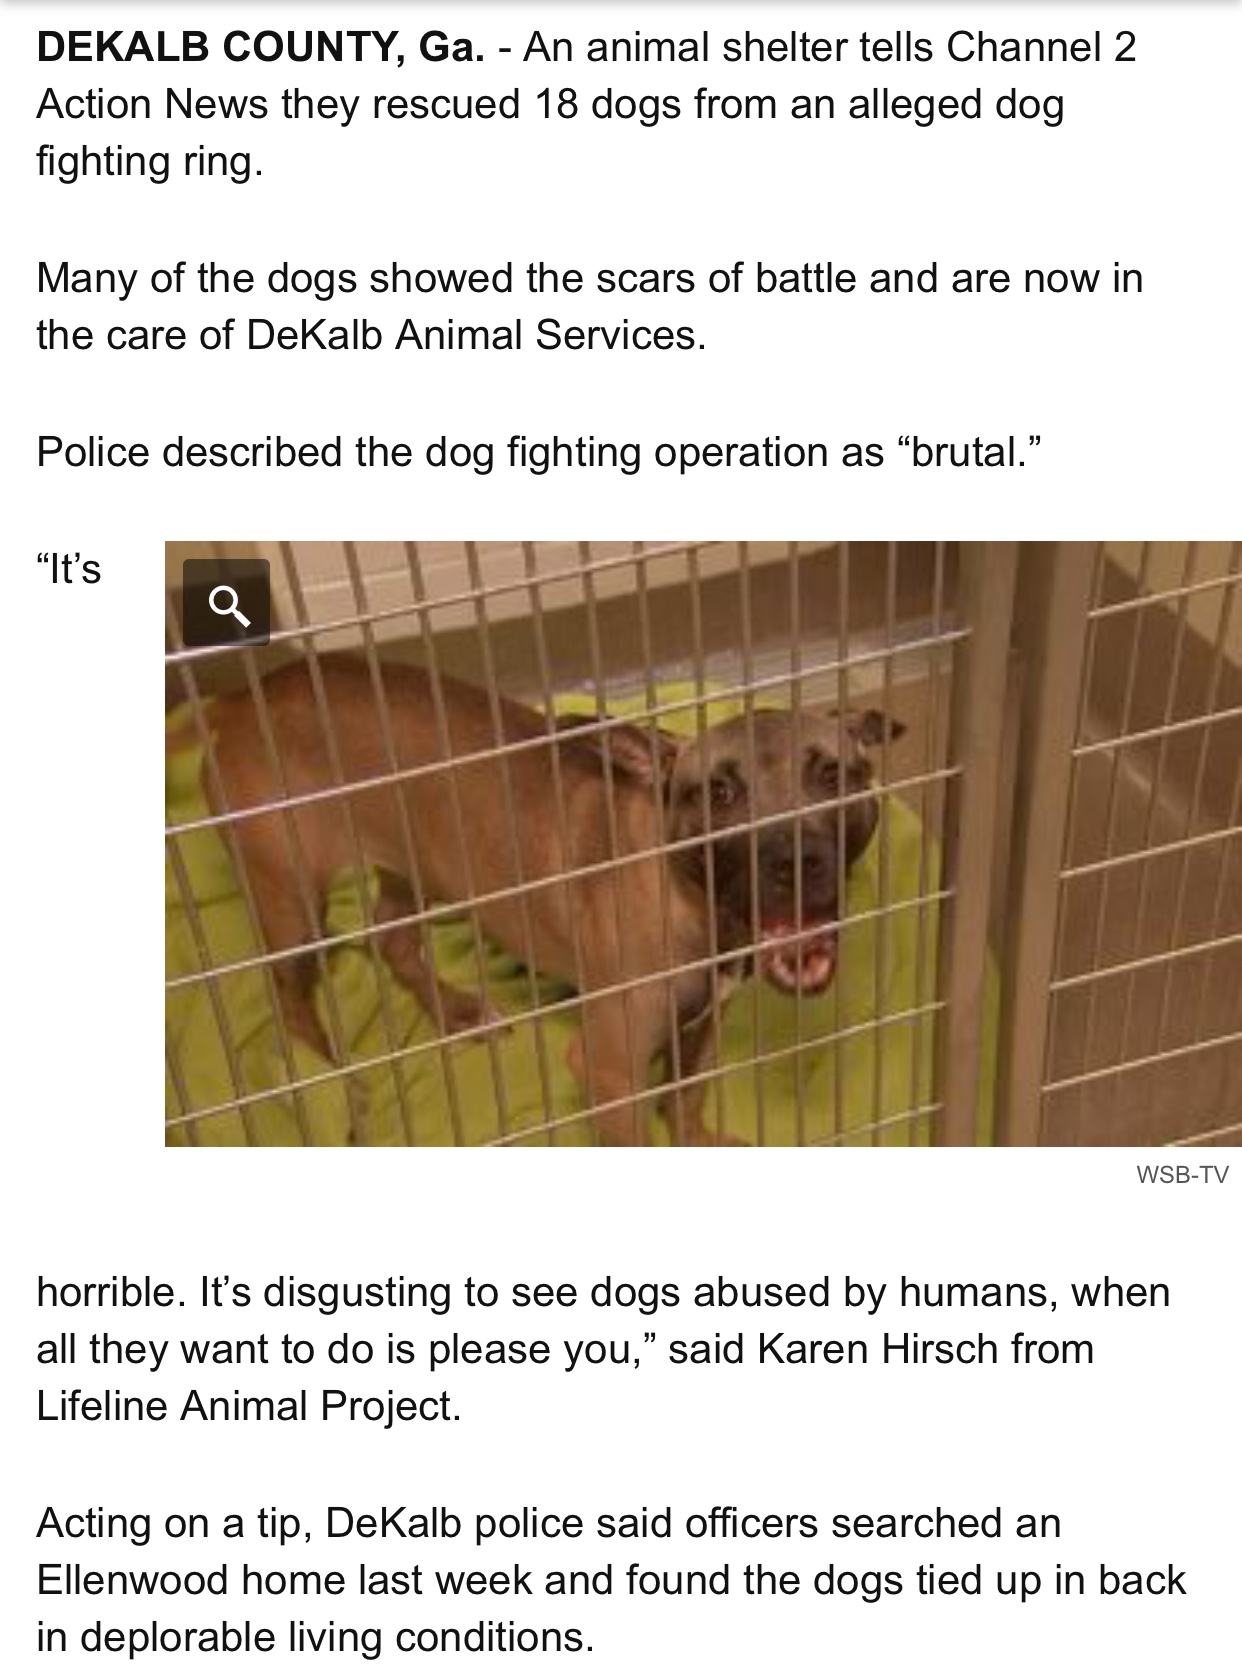 AND… ANOTHER DOGFIGHTING RING BUST